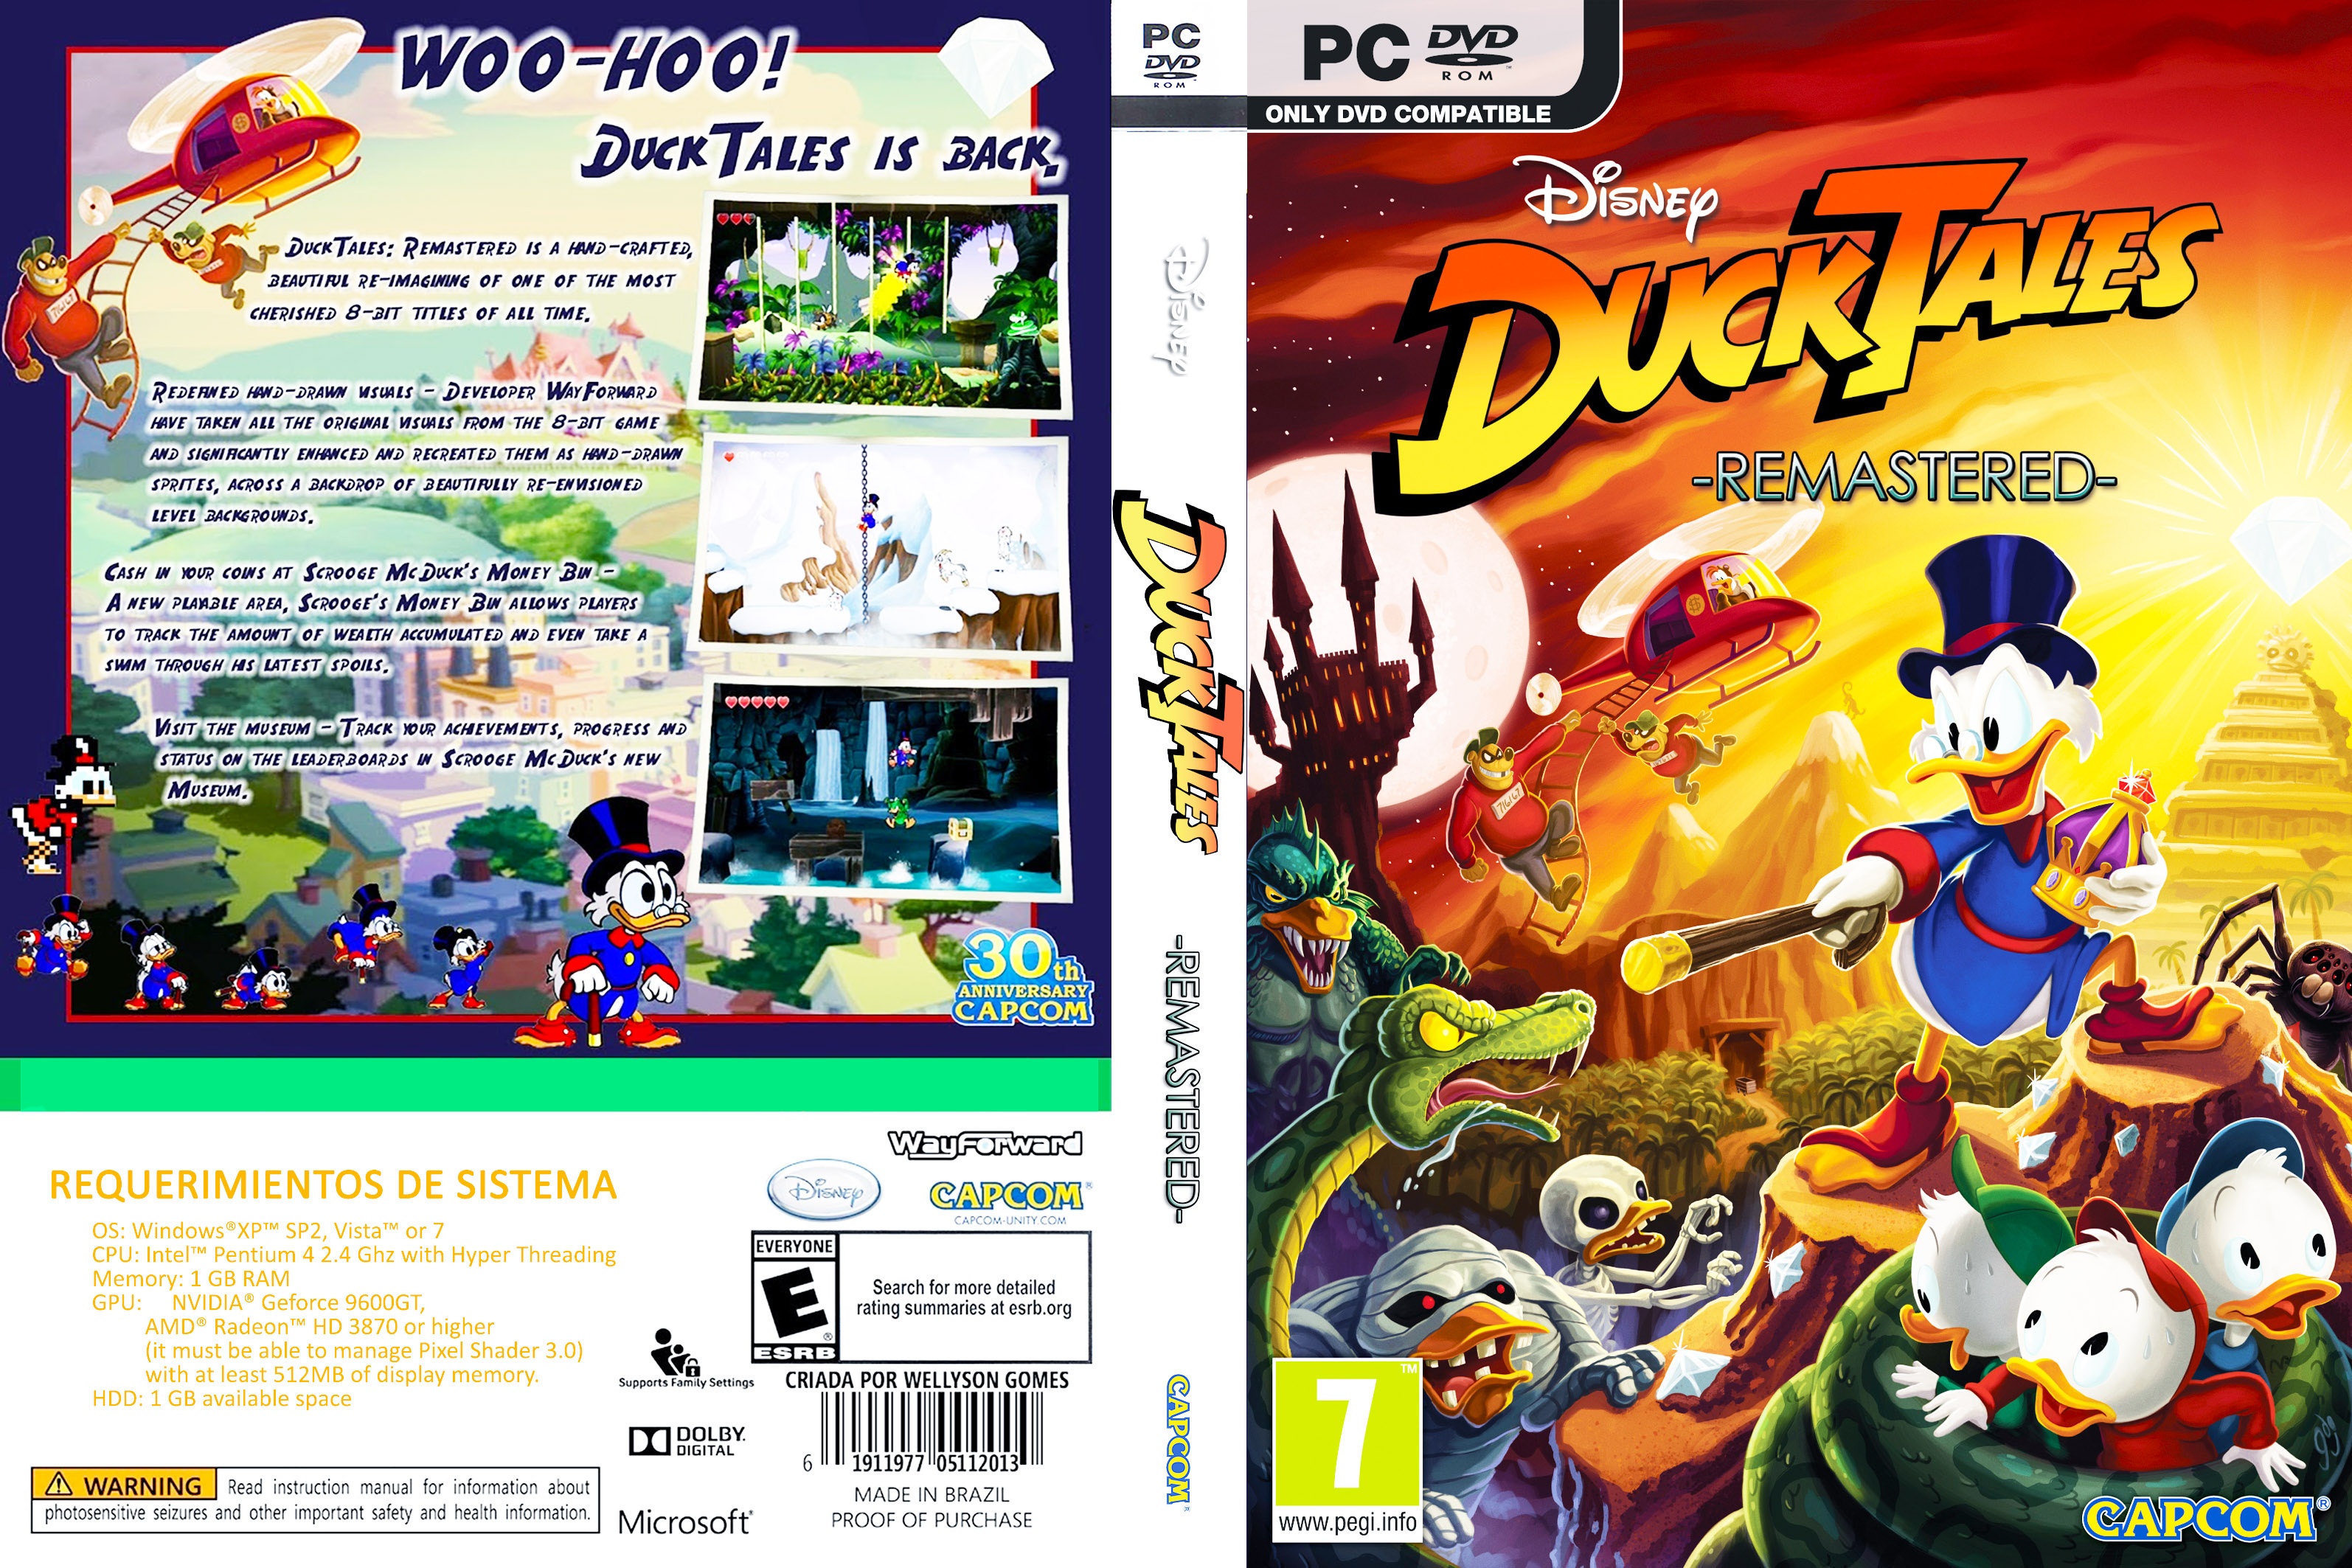 Pato Aventuras - DuckTales - Remastered box cover